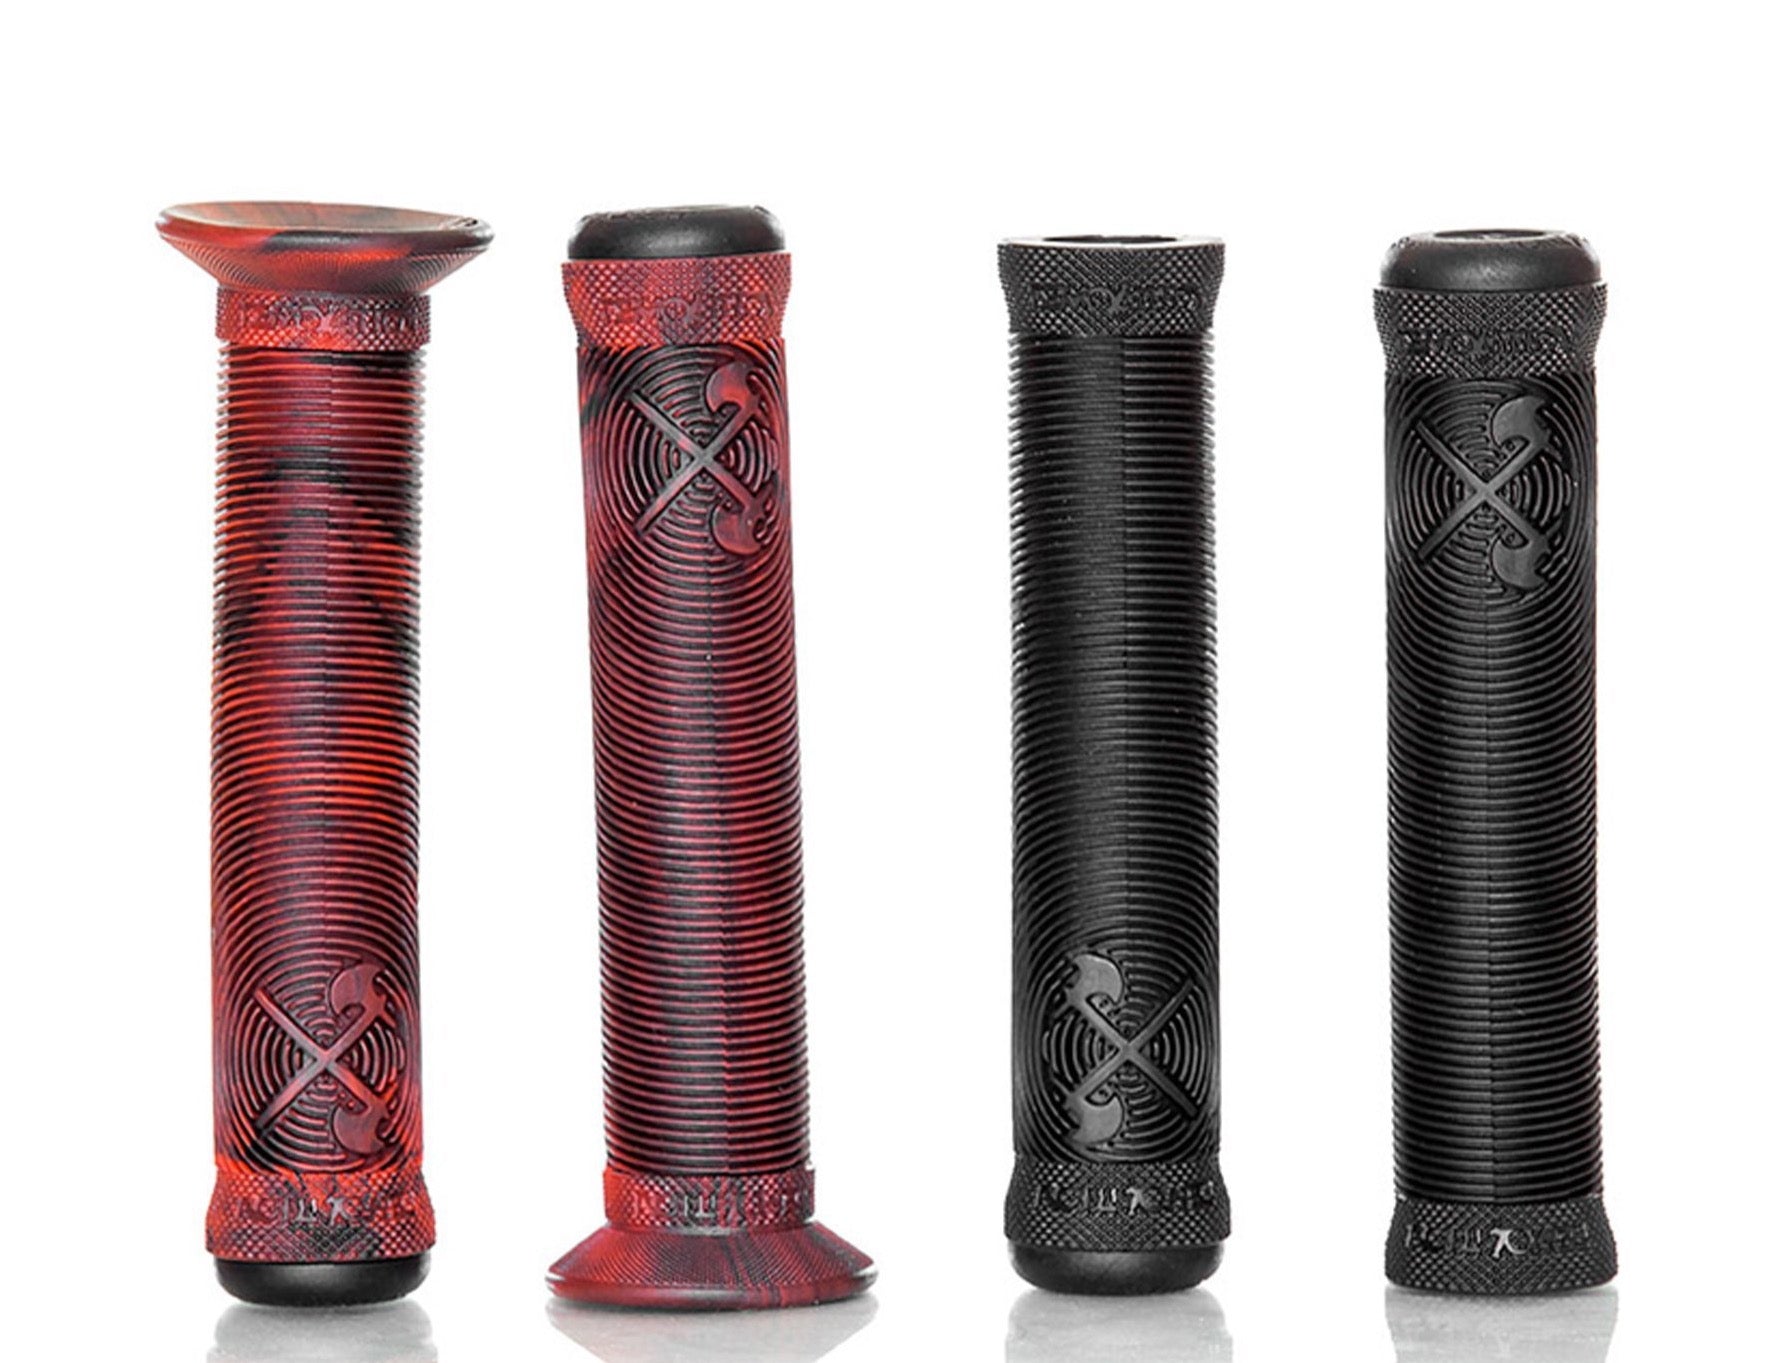 top view of the Demolition Axe grips in Black or red